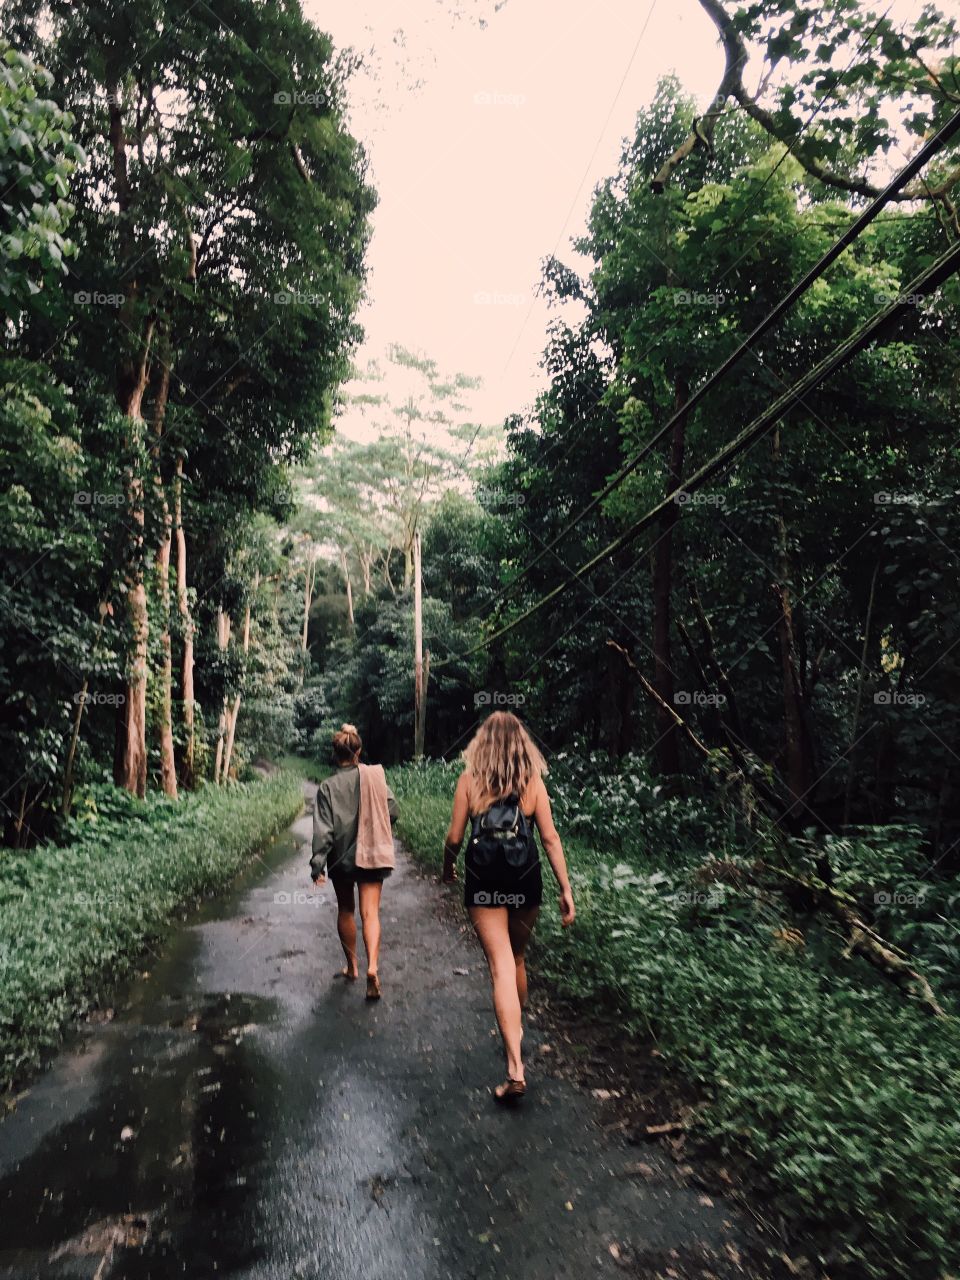 Hiking in the tropics with my best friend and a stranger 